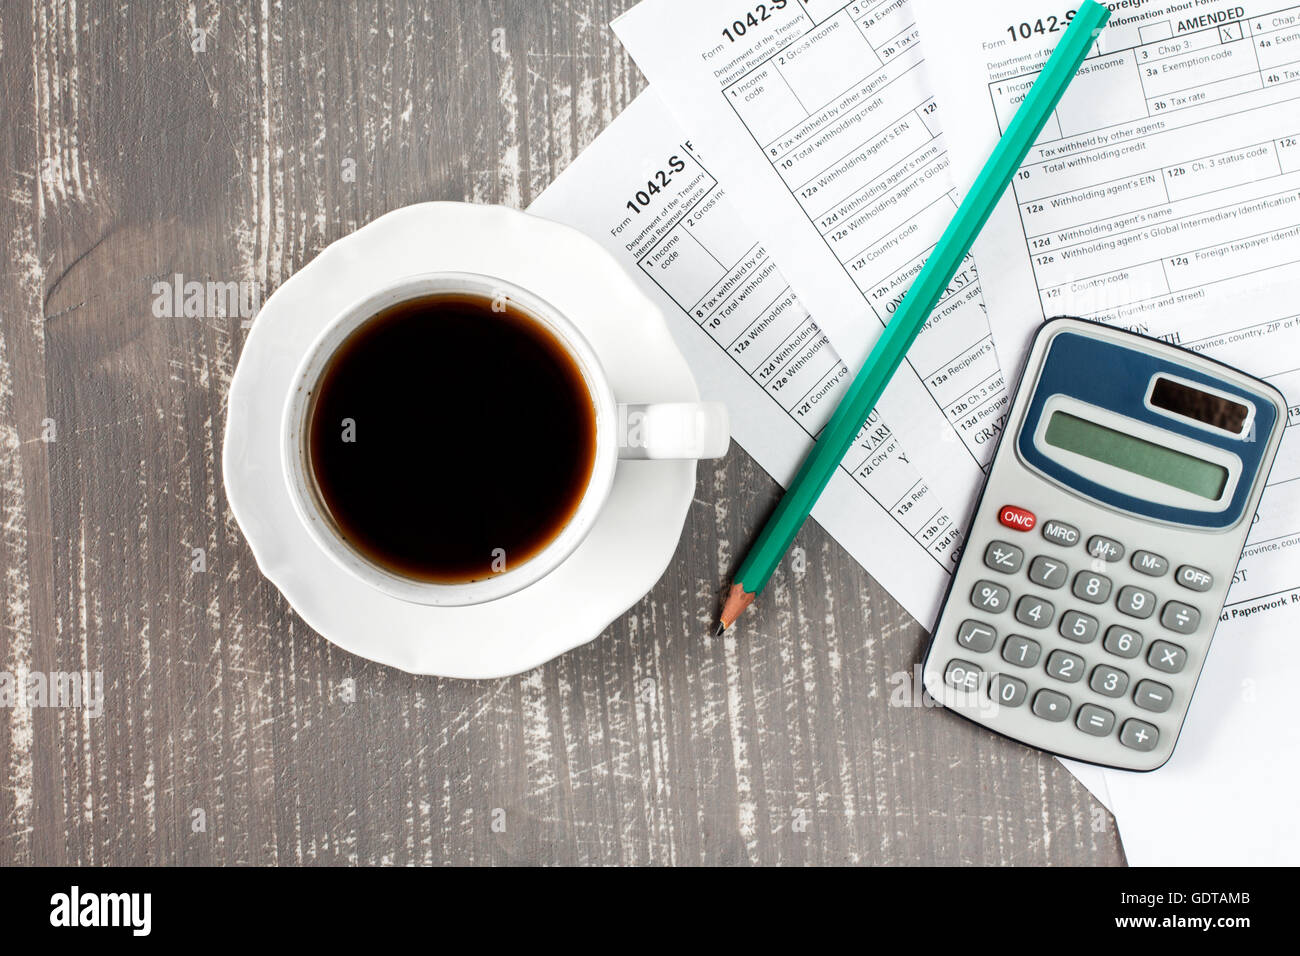 Coffee cup and forms 1042-s which confirms the payment of the tax in the United States Stock Photo